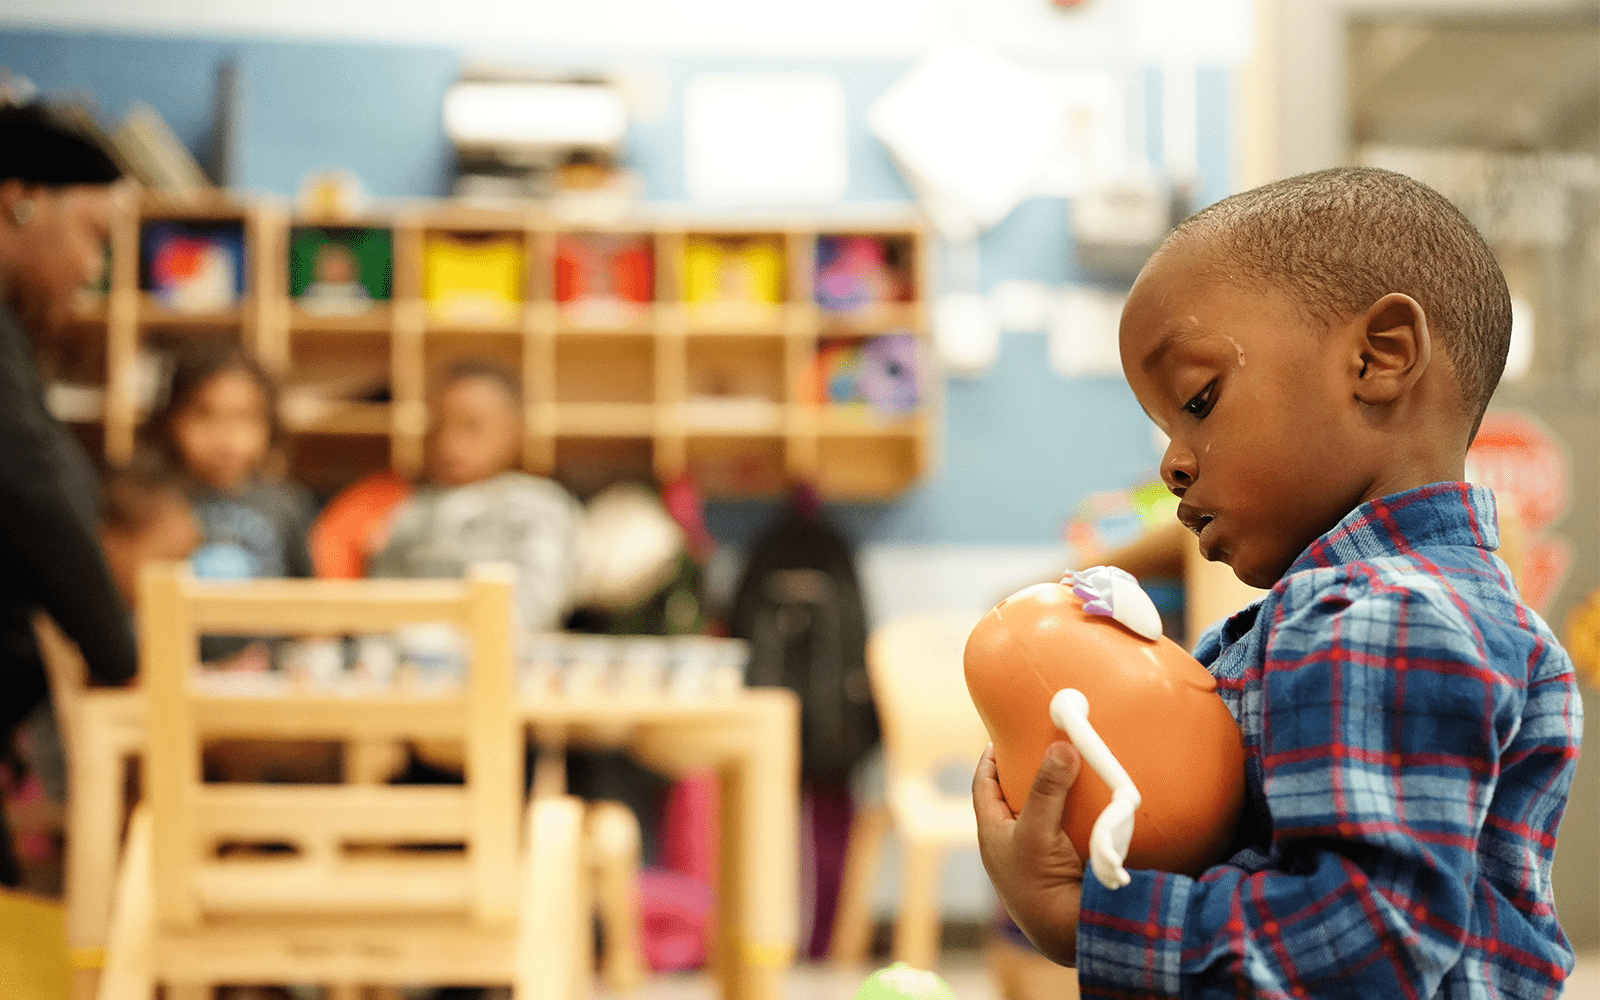 Little boy playing with mr. potato head toy in classroom